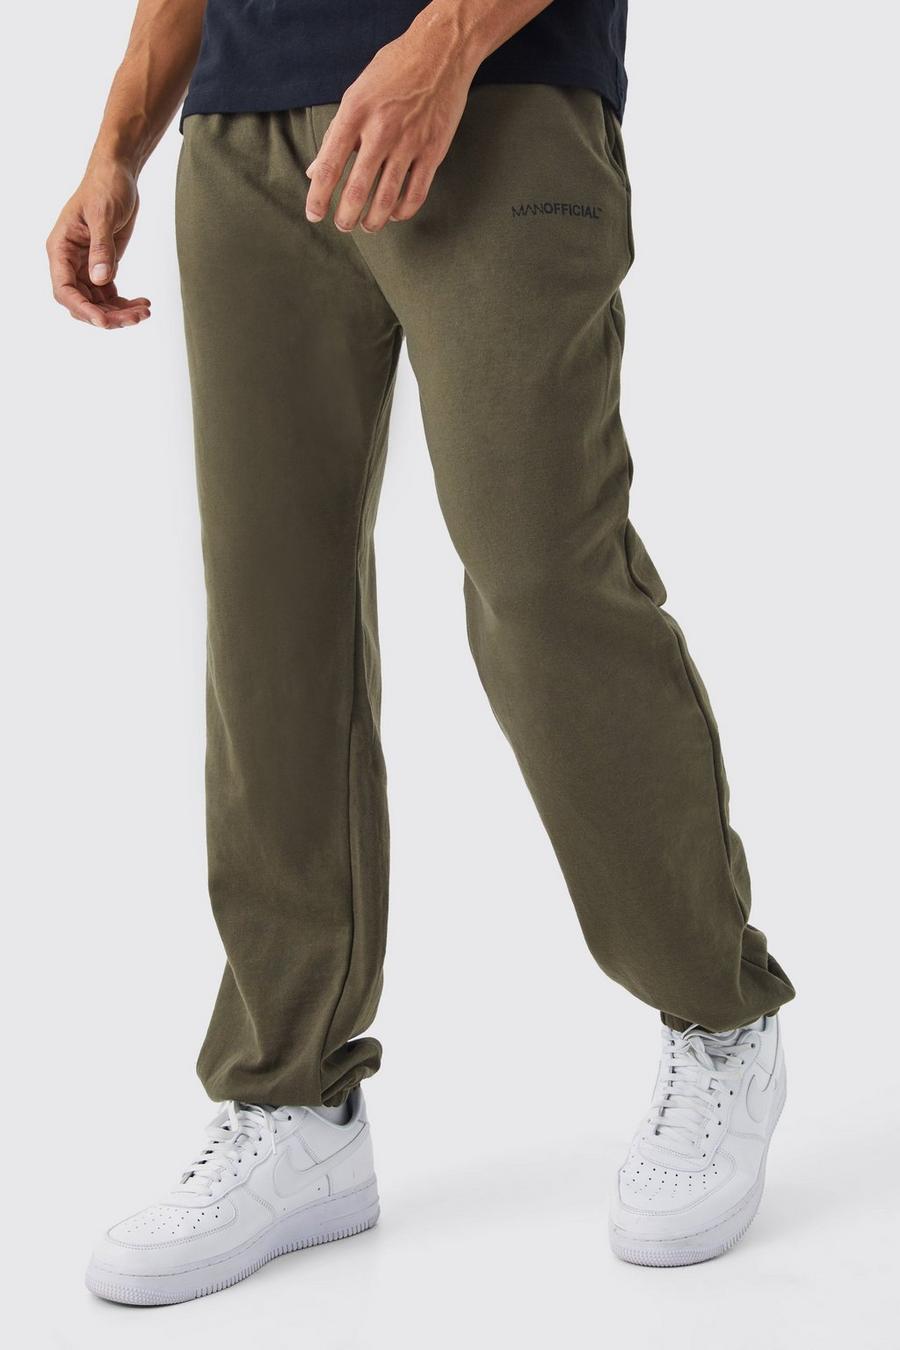 Khaki Man Official Oversized Joggers image number 1